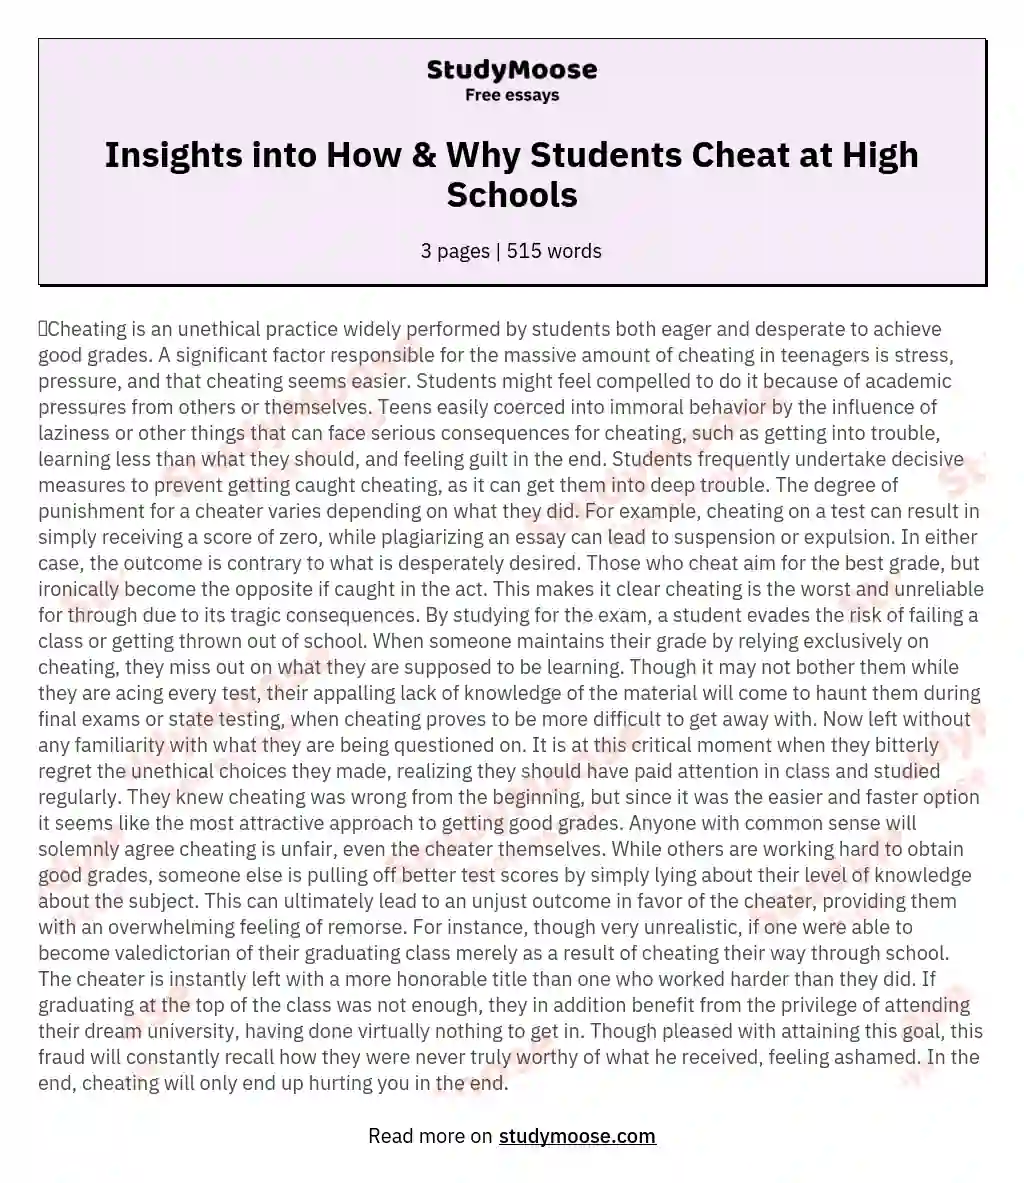 Insights into How & Why Students Cheat at High Schools essay